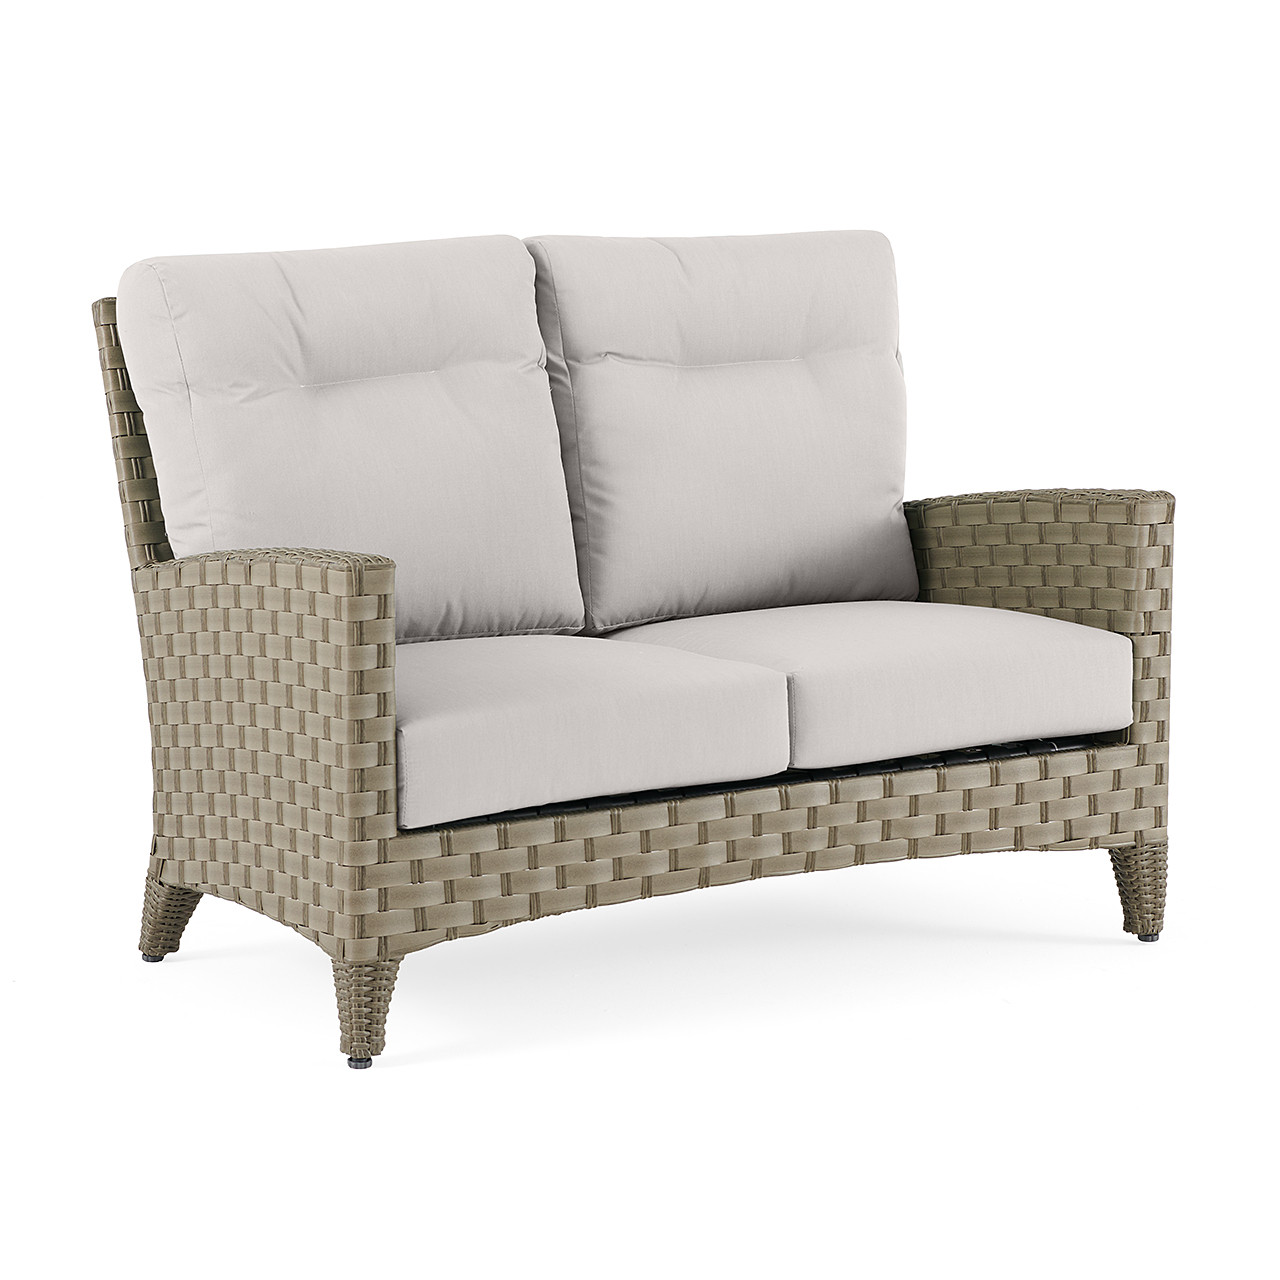 Gramercy Outdoor Wicker with Cushions 4 Piece Swivel Loveseat Set + 32 in. Sq. Coffee Table